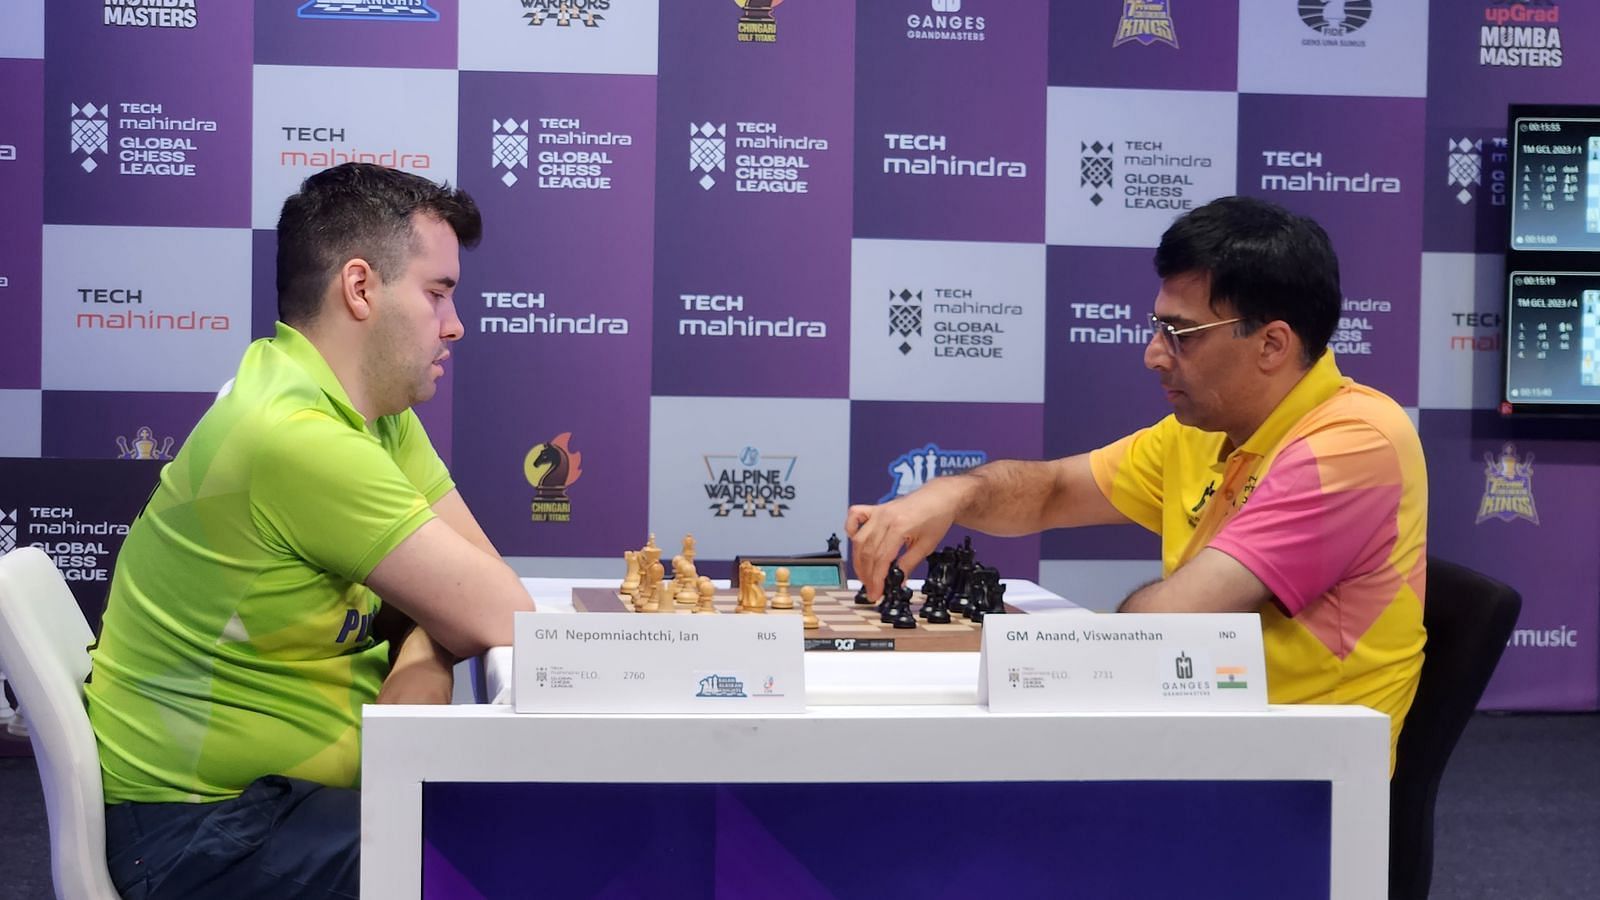 Viswanathan Anand, representing the Ganges Grandmasters, facing off against Ian Nepomniachtchi. (Image Courtesy:Twitter- GCLlive)